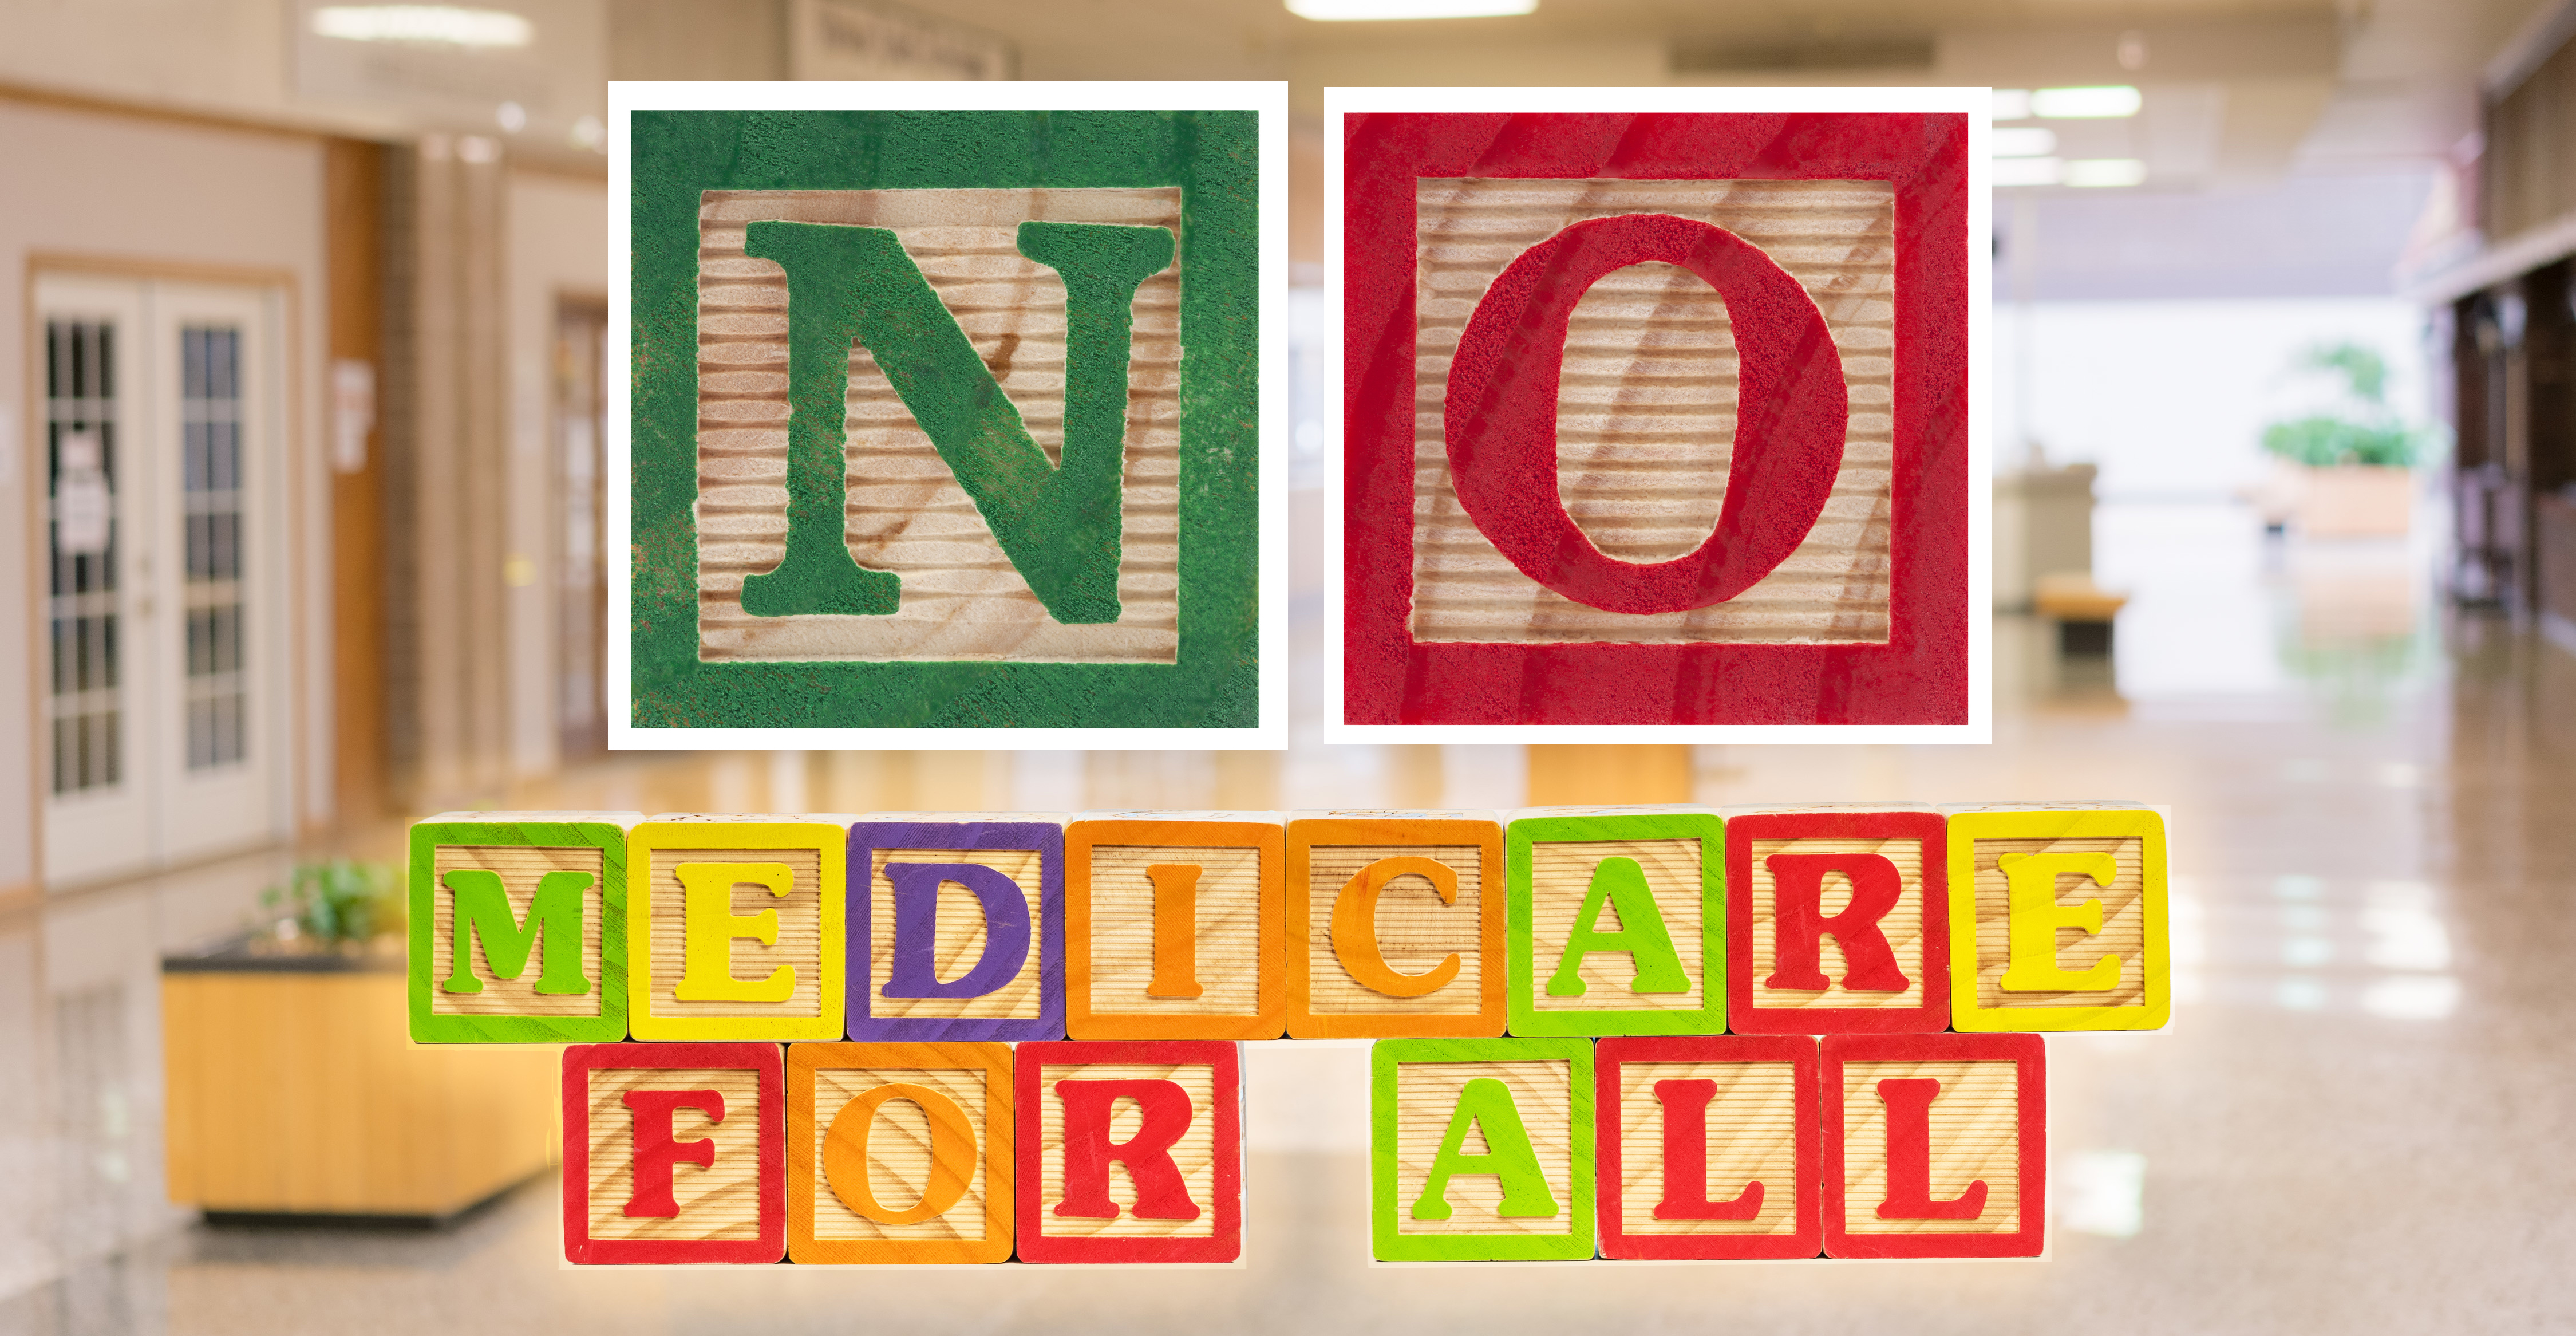 NO Medicare for All